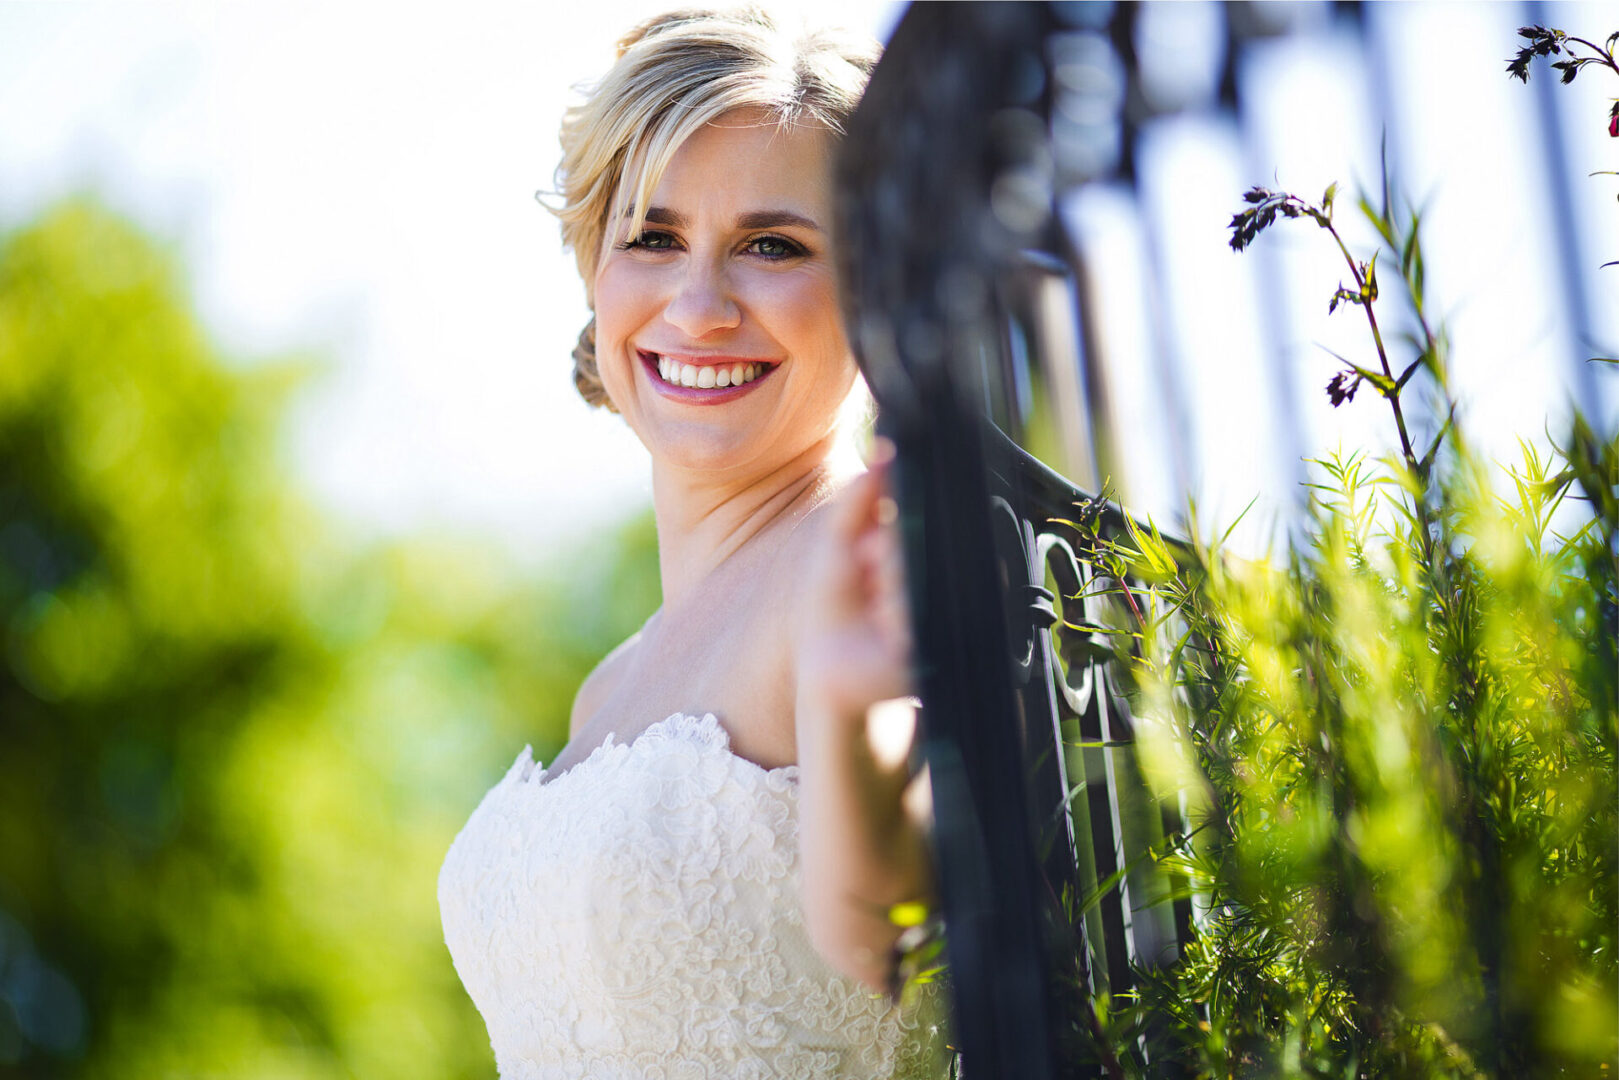 A new bride along wearing a white color dress near fence